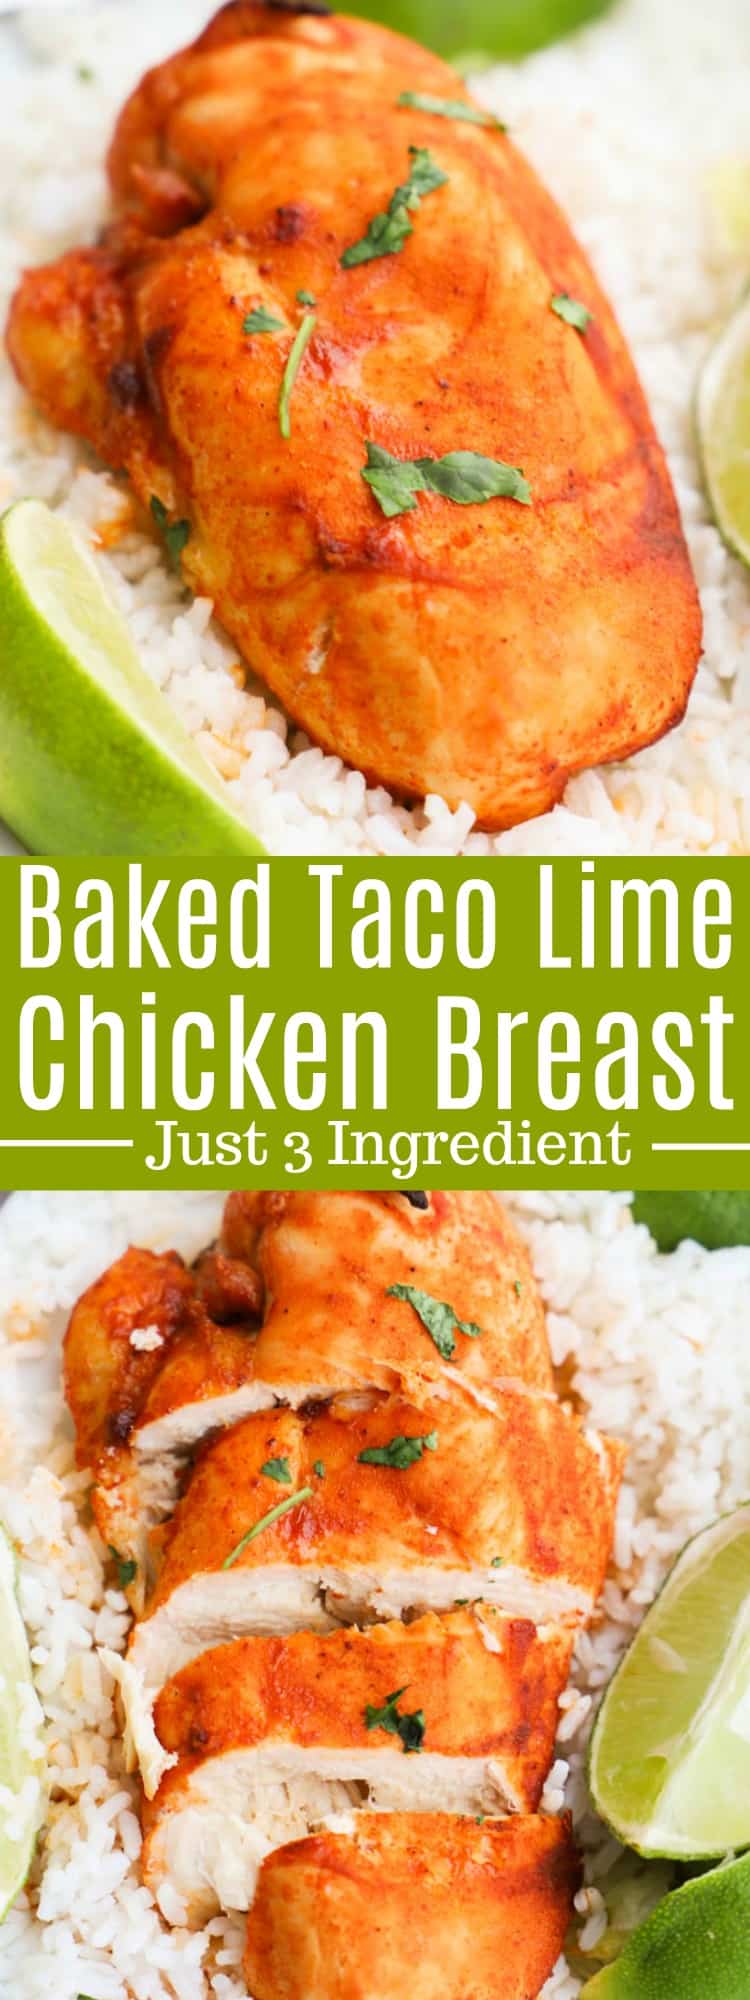 Baked Taco Lime Chicken Breast